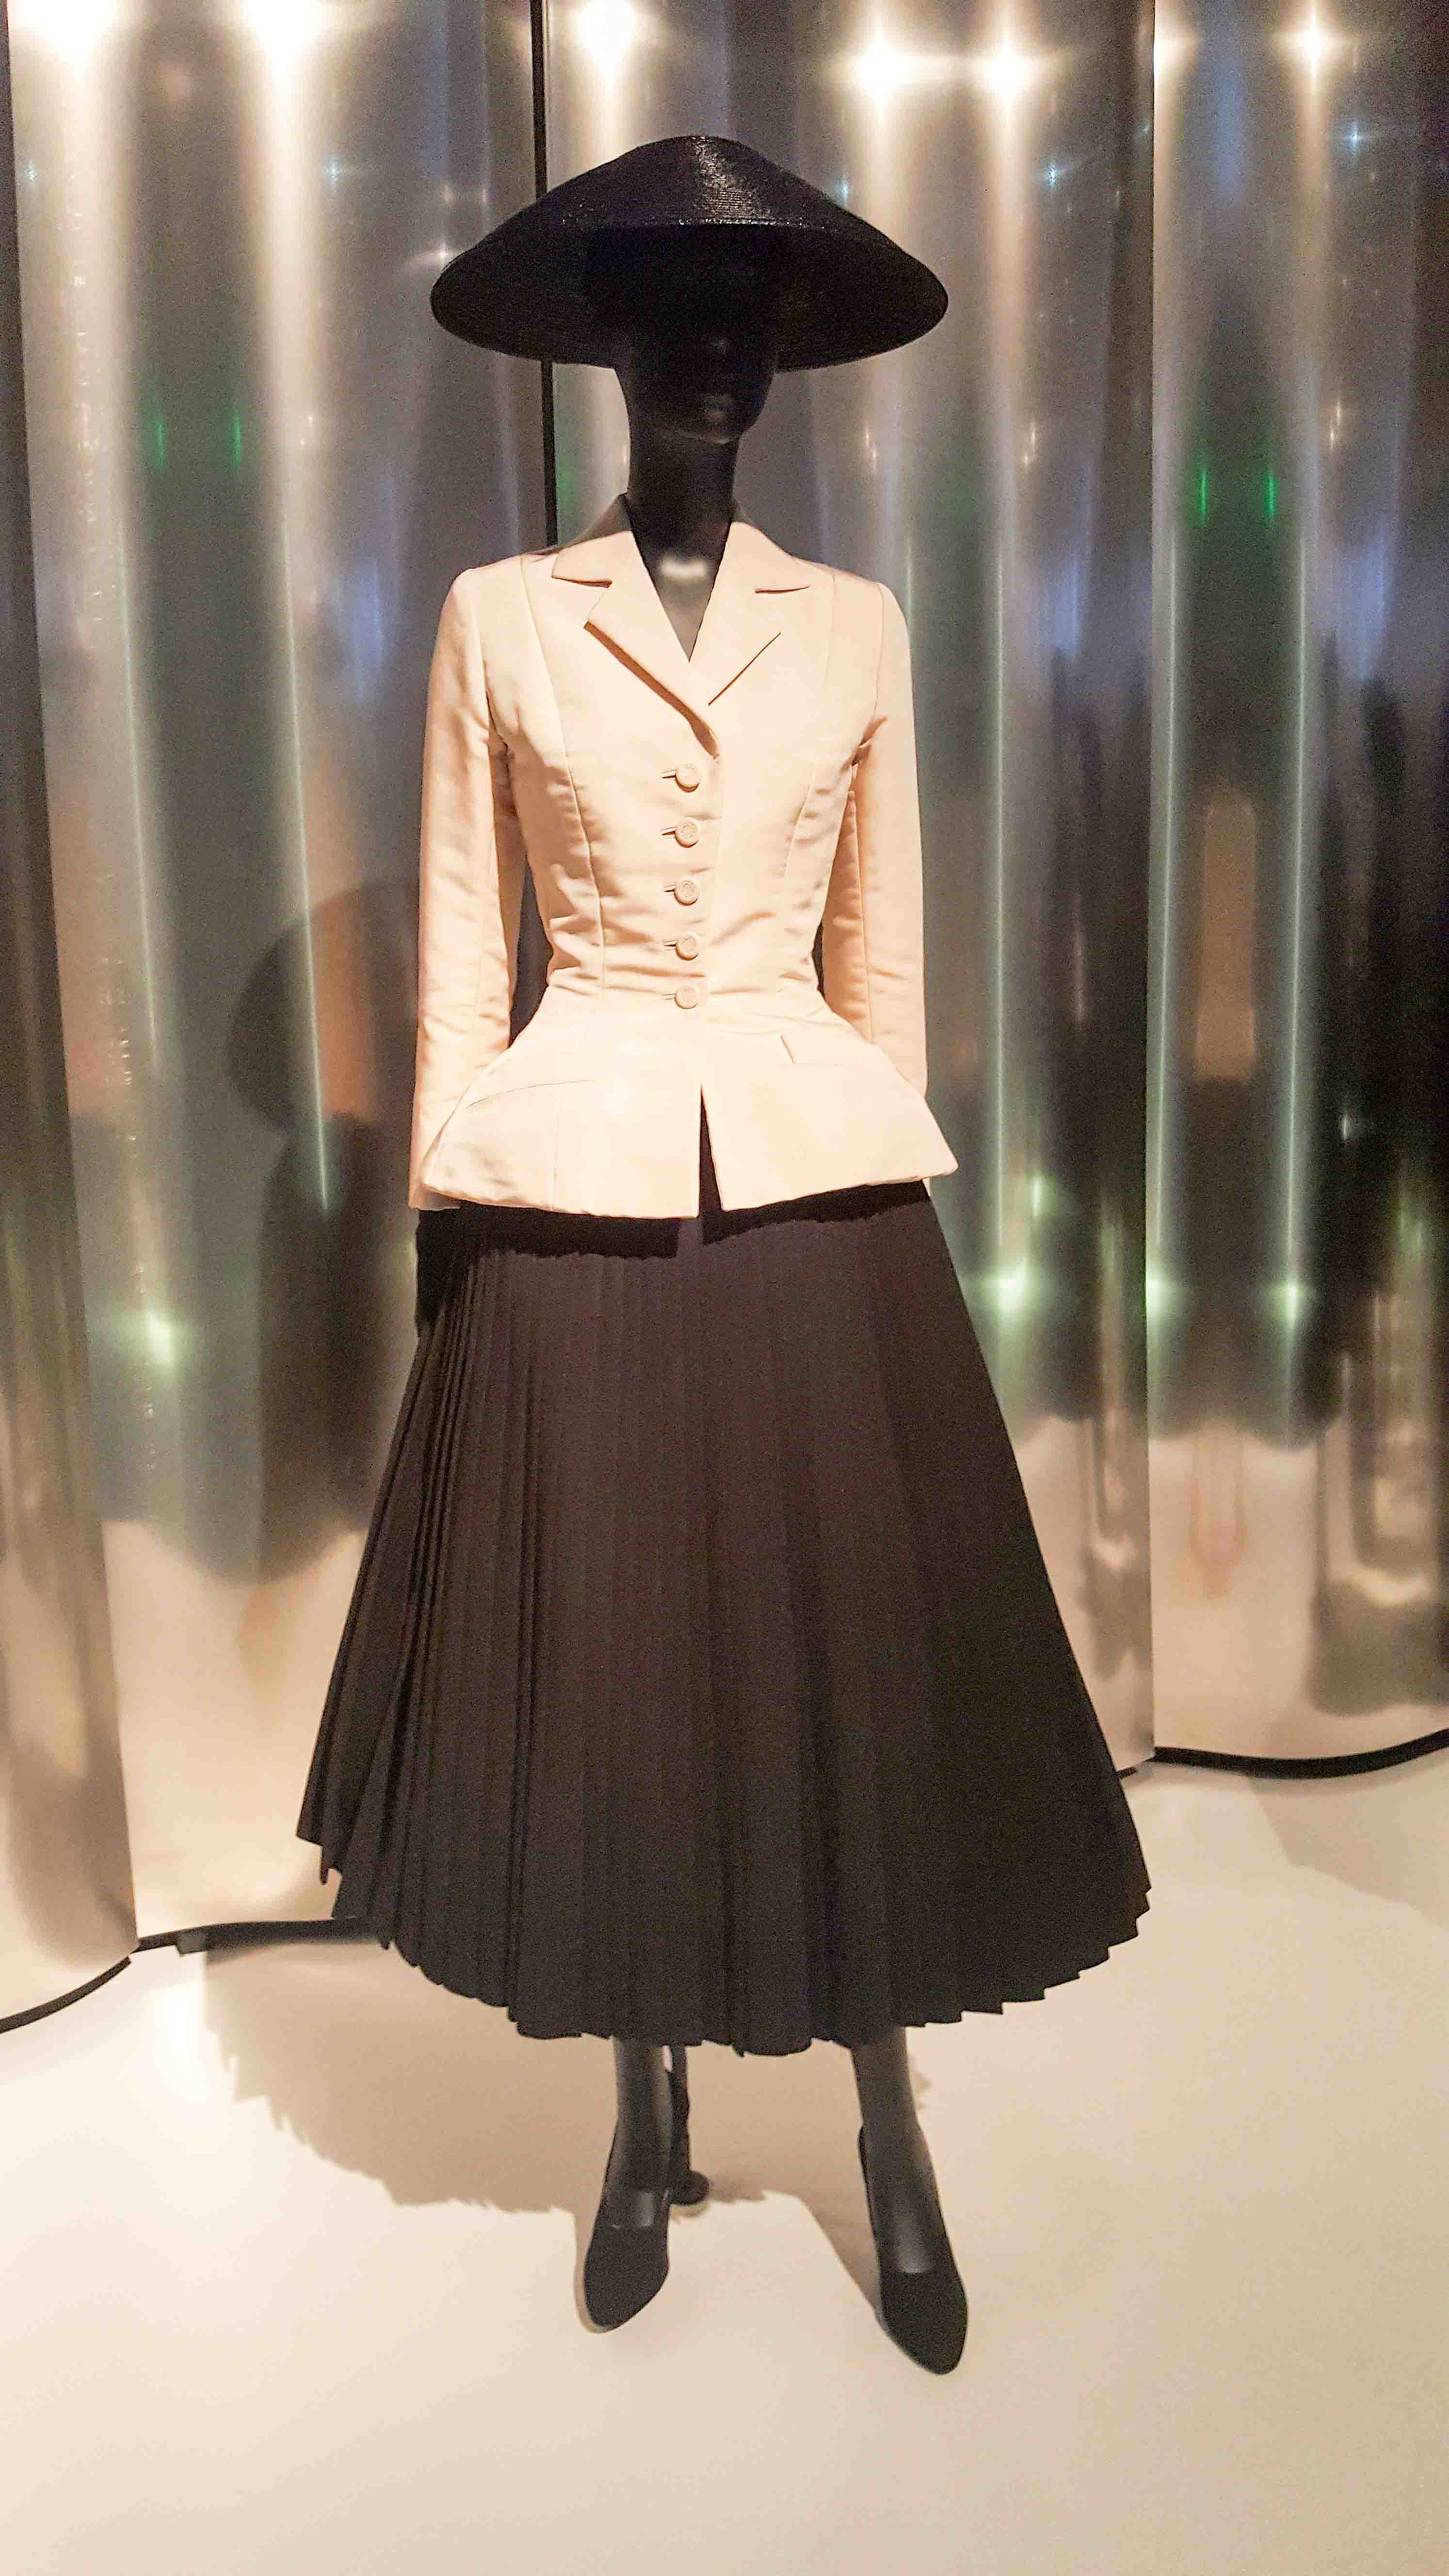 Silk shantung and pleated wool bar suit by Christian Dior ⏤ Spring-Summer 1947. Photo by SpiritedMichelle (2019). Denver Art Museum. PD-CCA-Share Alike 4.0 International. Wikimedia Commons.